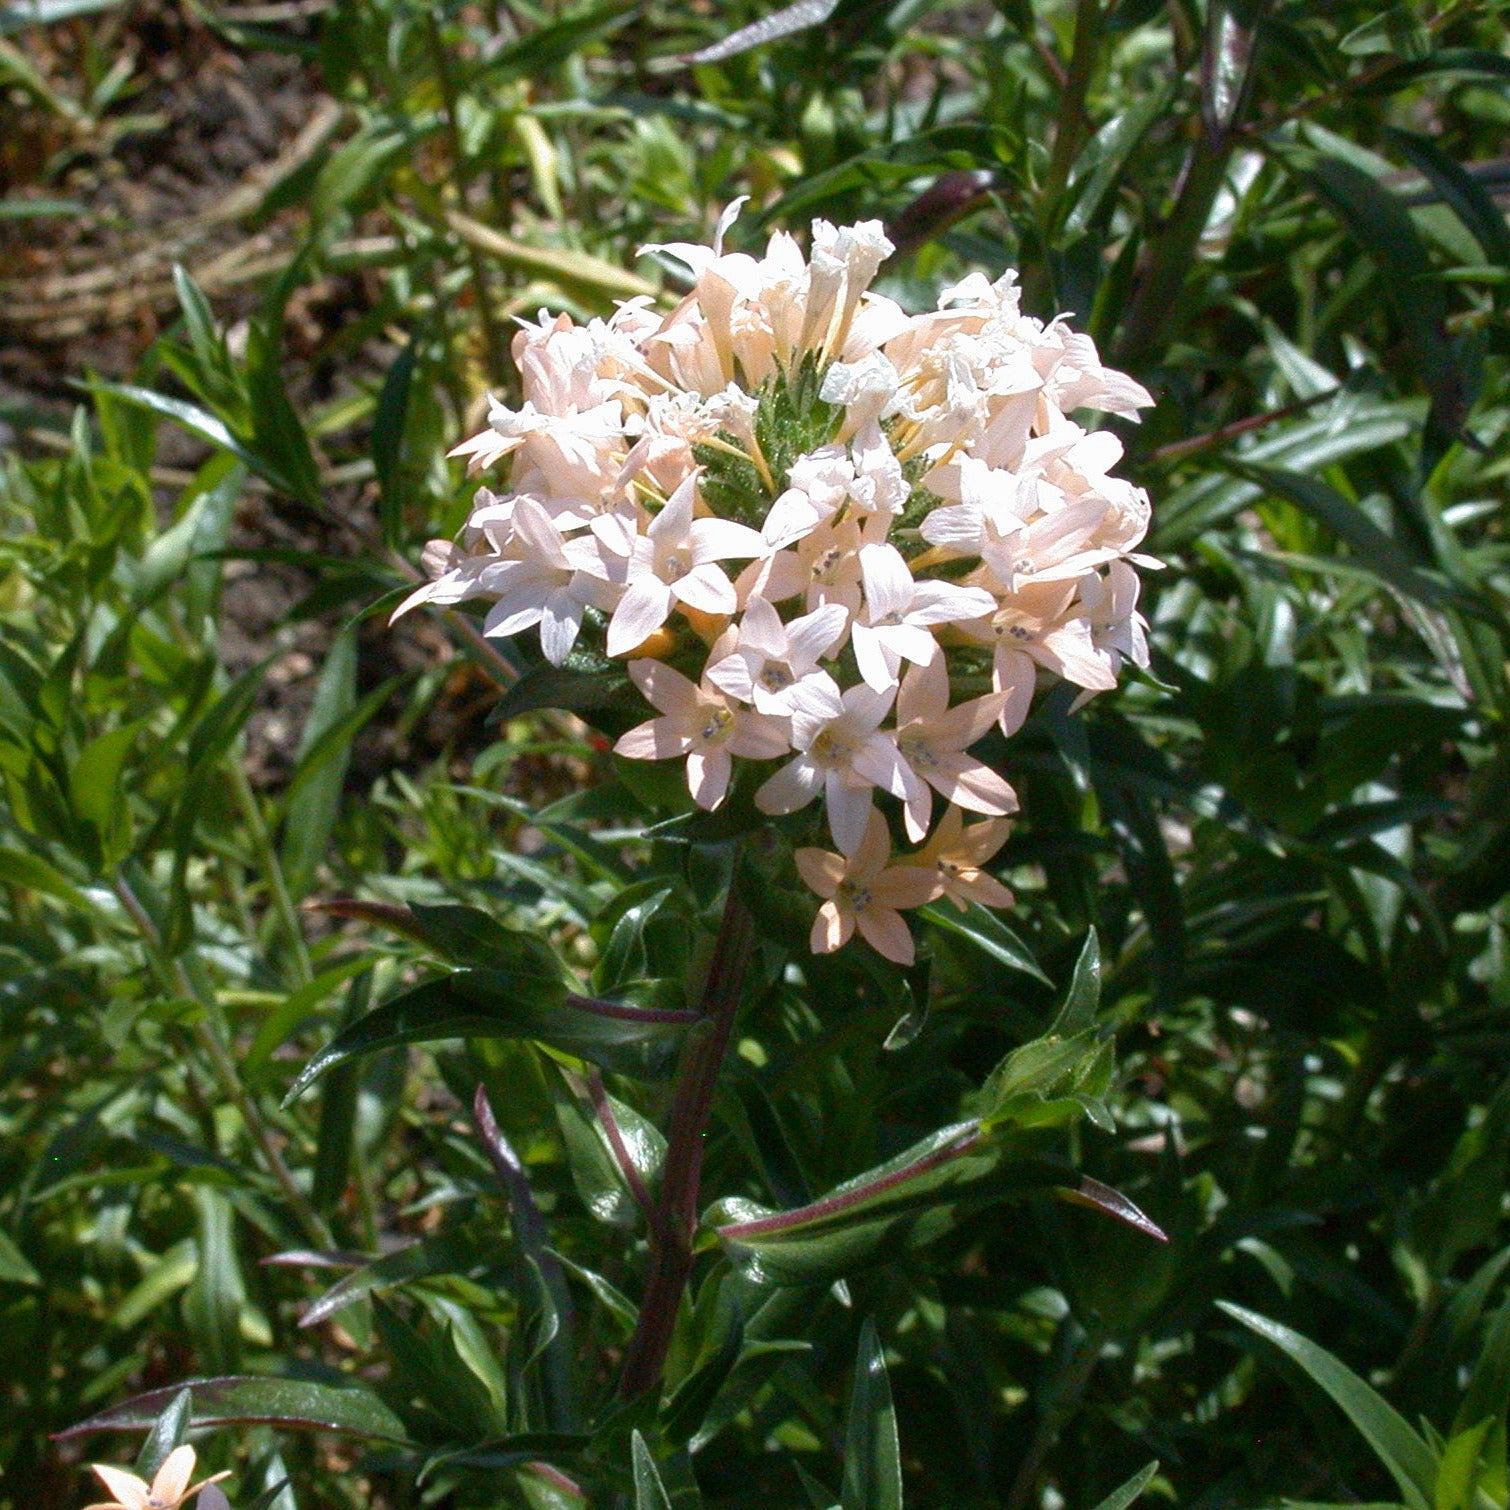 A plant with a red stem and dark green, long and slender leaves. At the top there is a burst of small pale pink flowers.